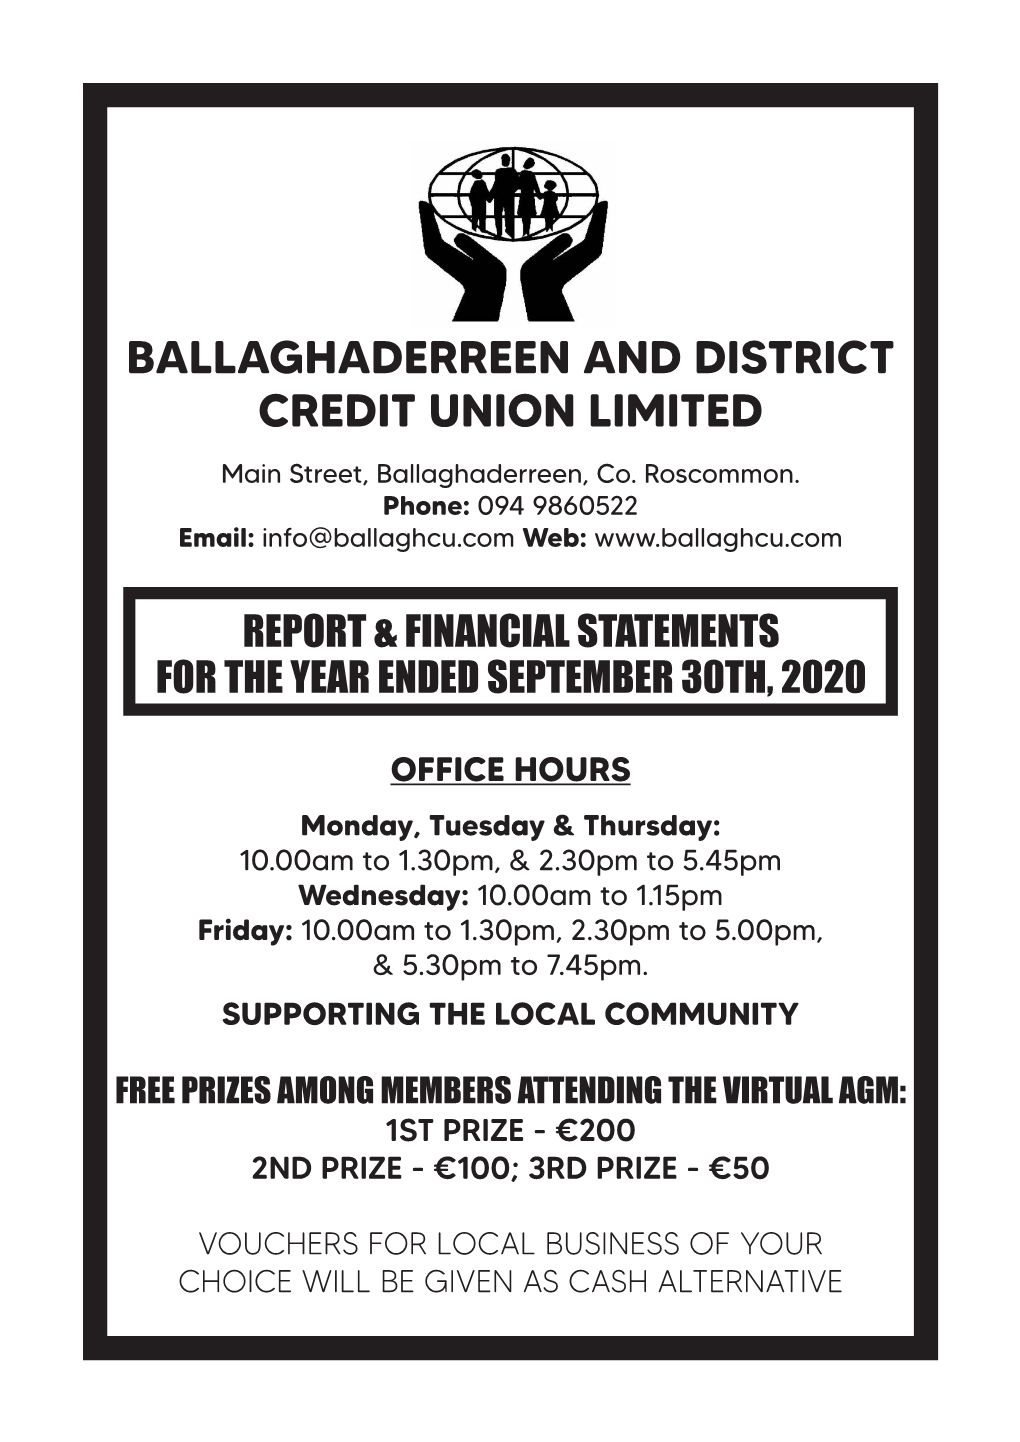 BALLAGHADERREEN and DISTRICT CREDIT UNION LIMITED Main Street, Ballaghaderreen, Co